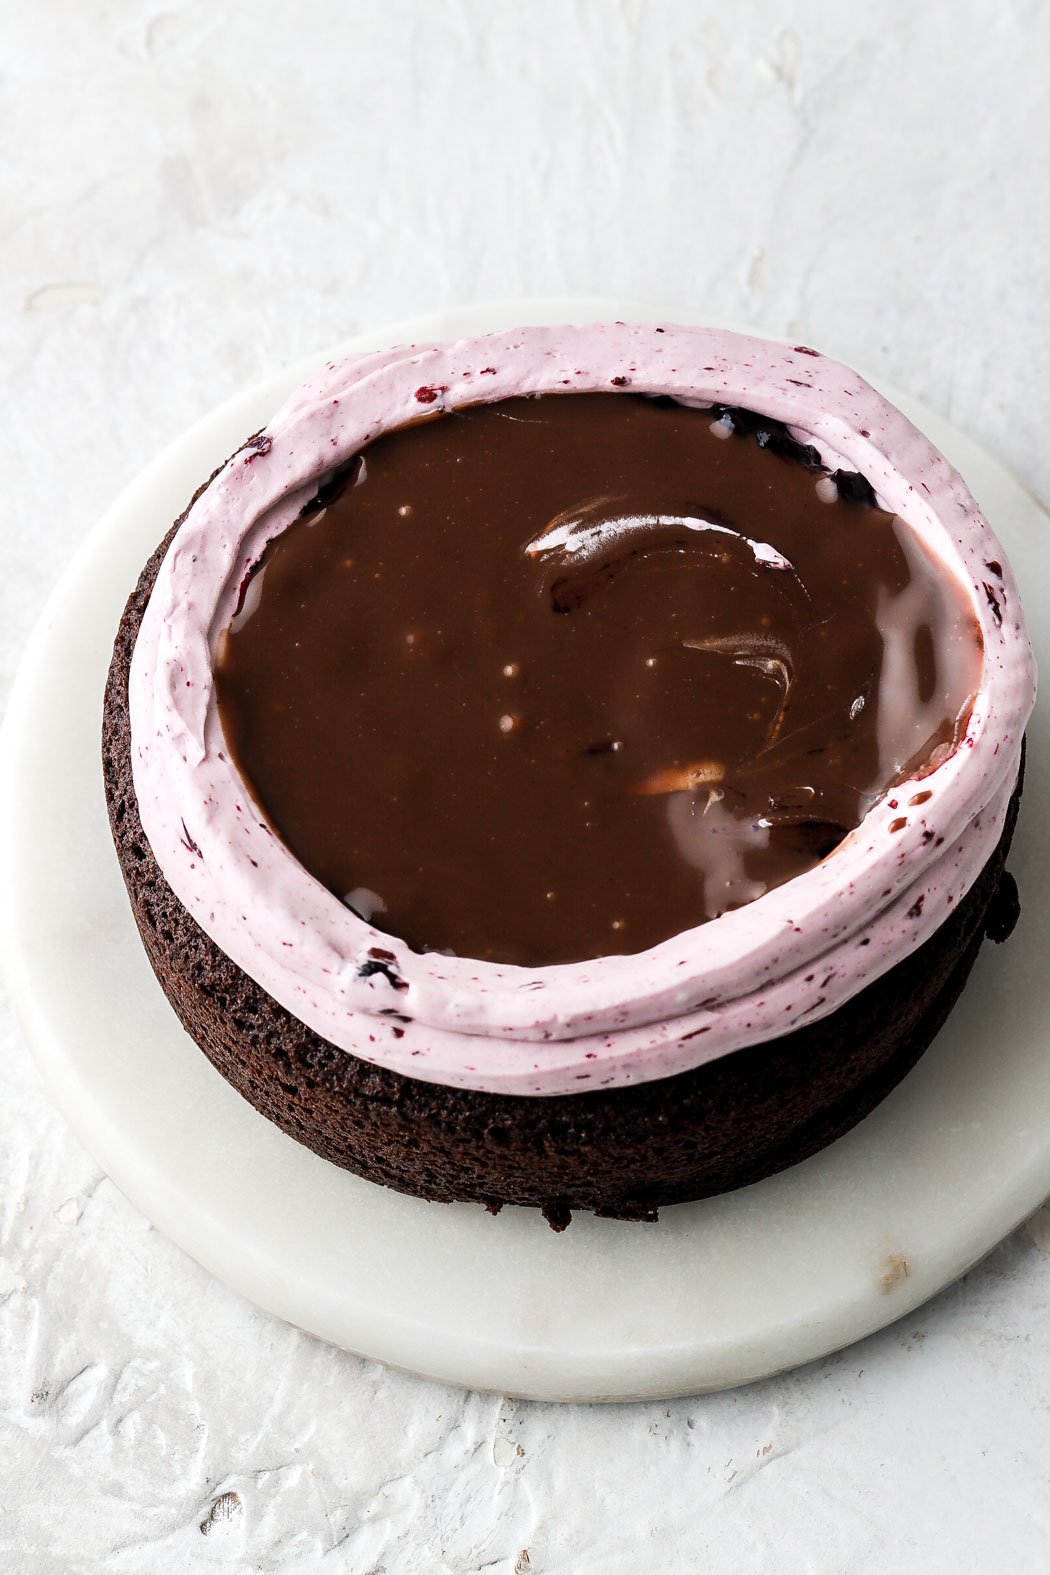 Border of blueberry buttercream, blueberry jam filling and topped with chocolate ganache